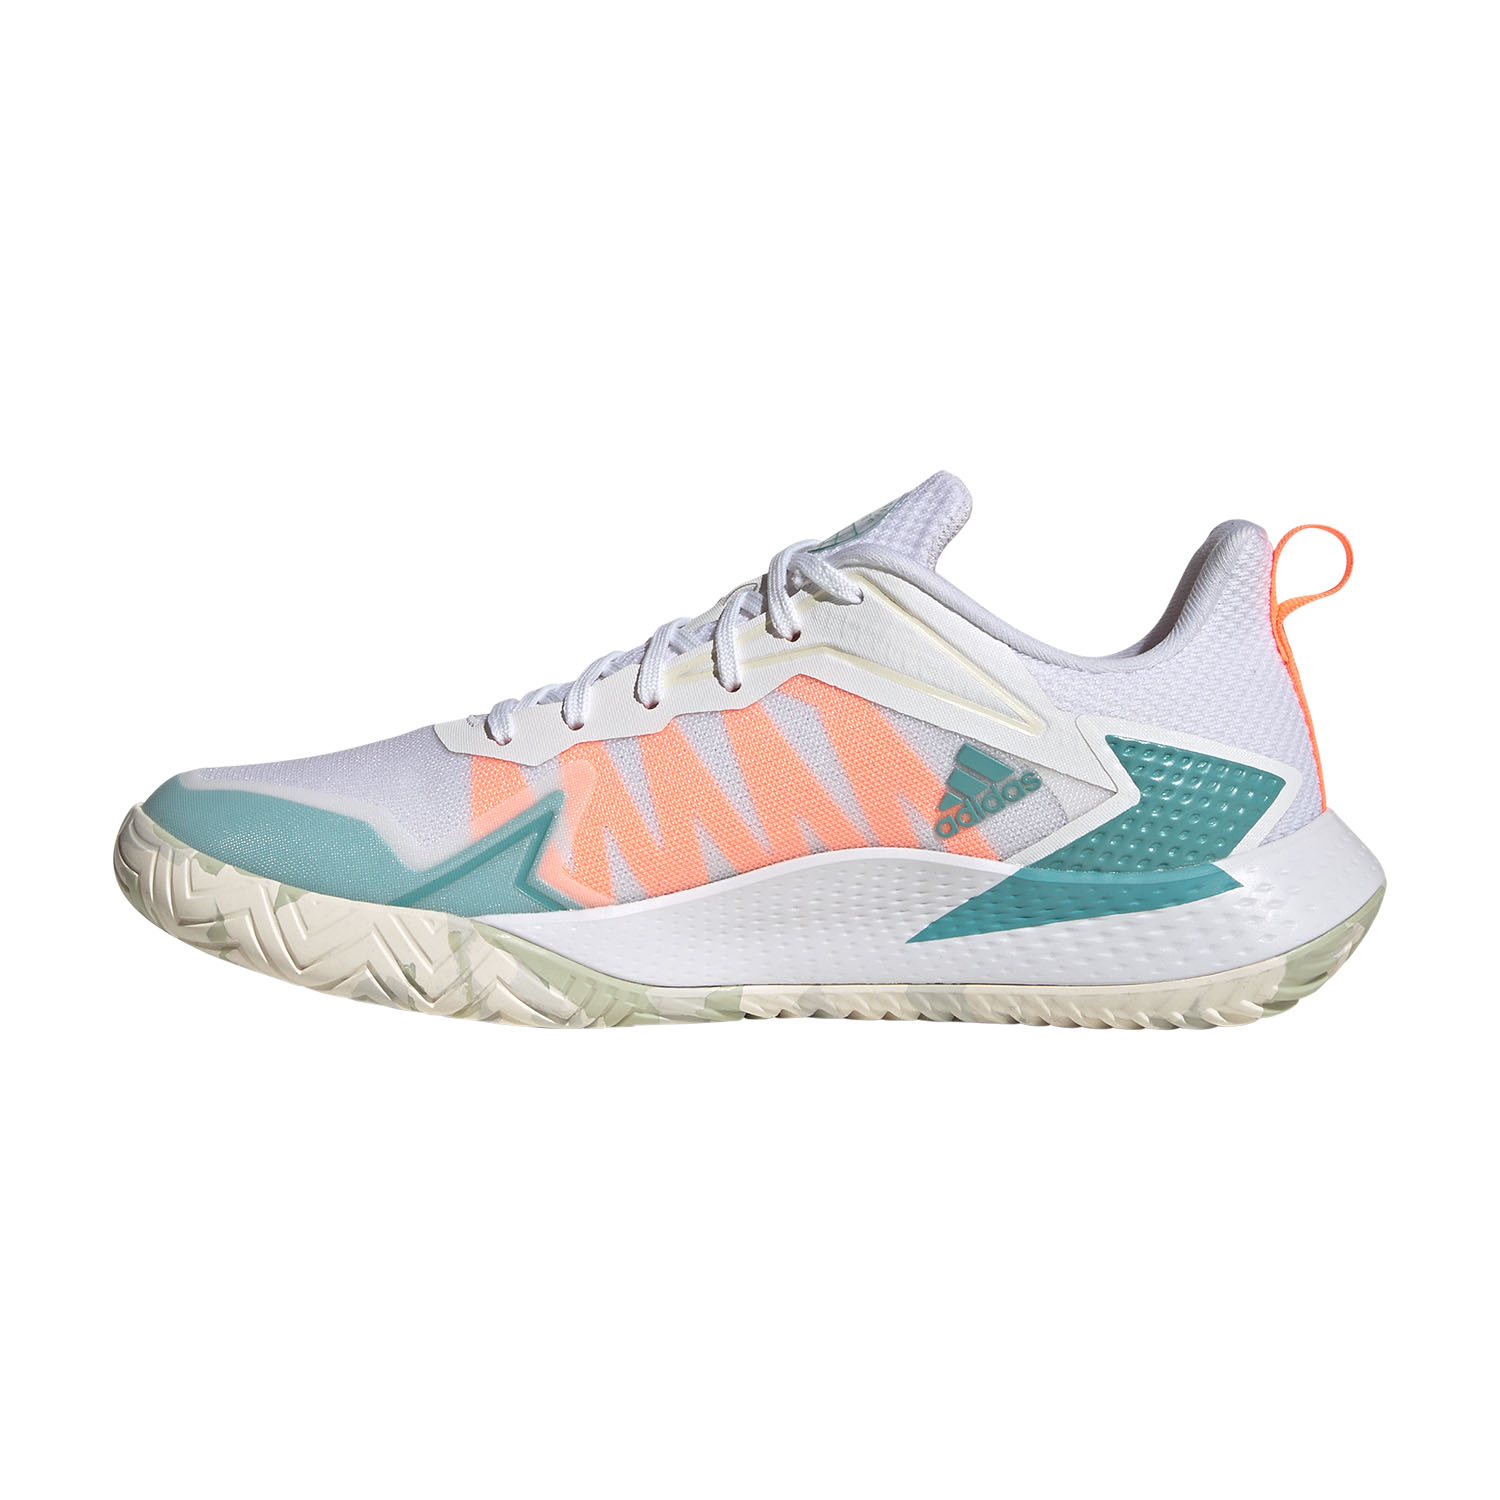 adidas Defiant Speed Woman's Tennis Shoes - Cloud White